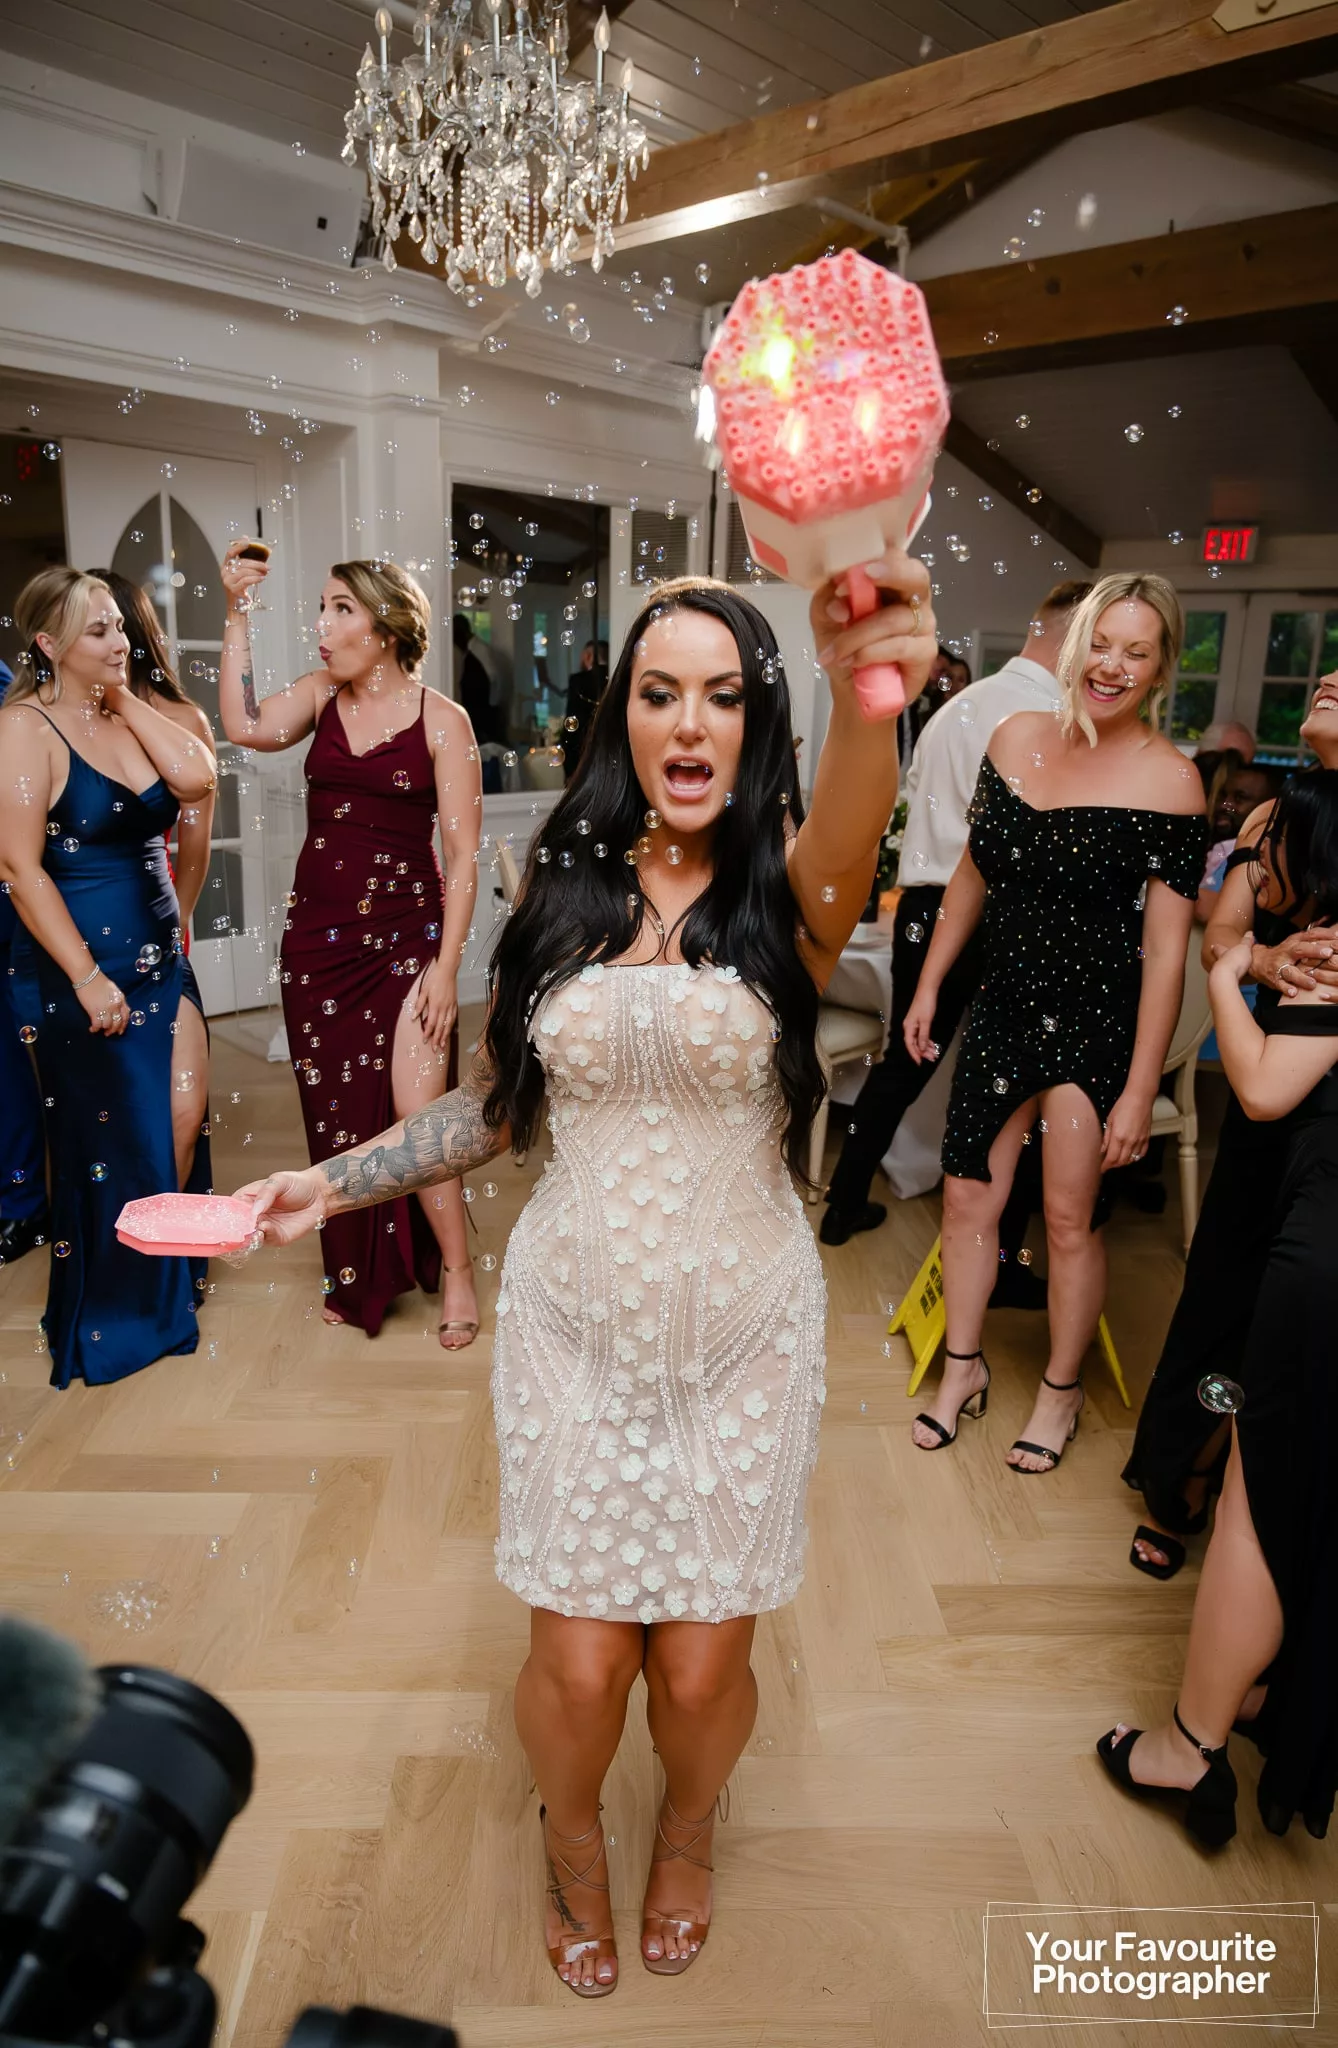 Bride Samantha uses a bubble gun to spray bubbles around the dance floor at her wedding reception